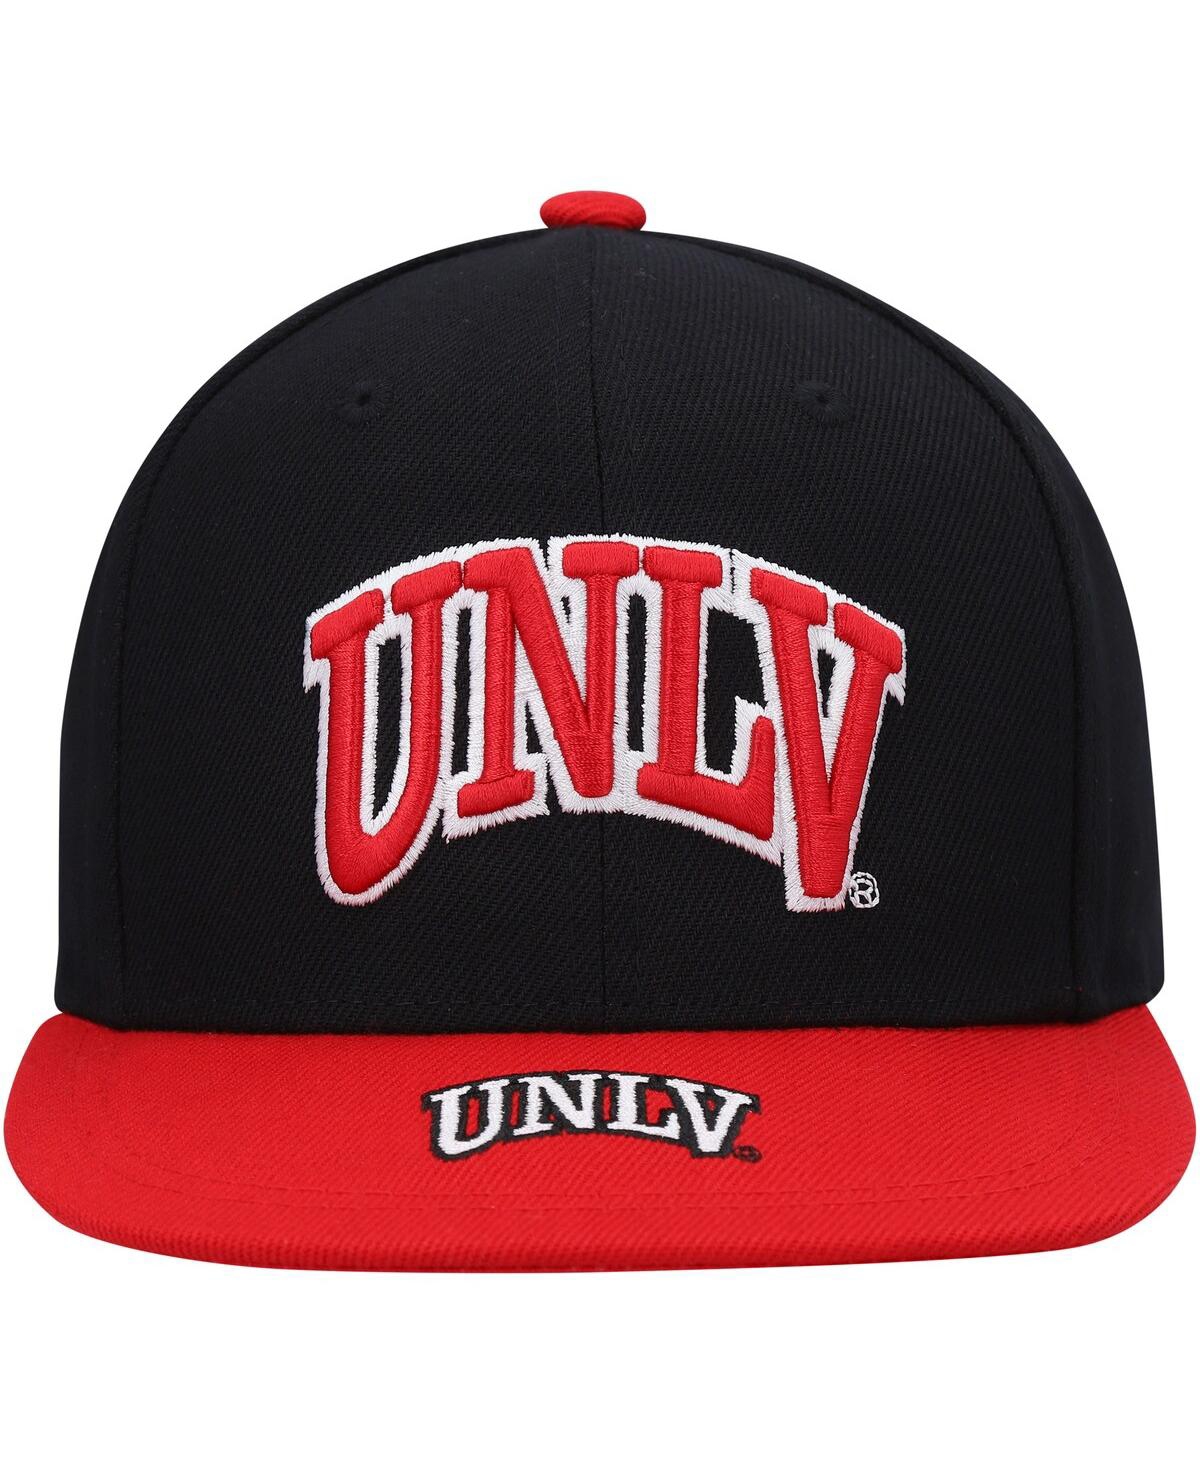 Shop Mitchell & Ness Big Boys  Black And Red Unlv Rebels Logo Bill Snapback Hat In Black,red